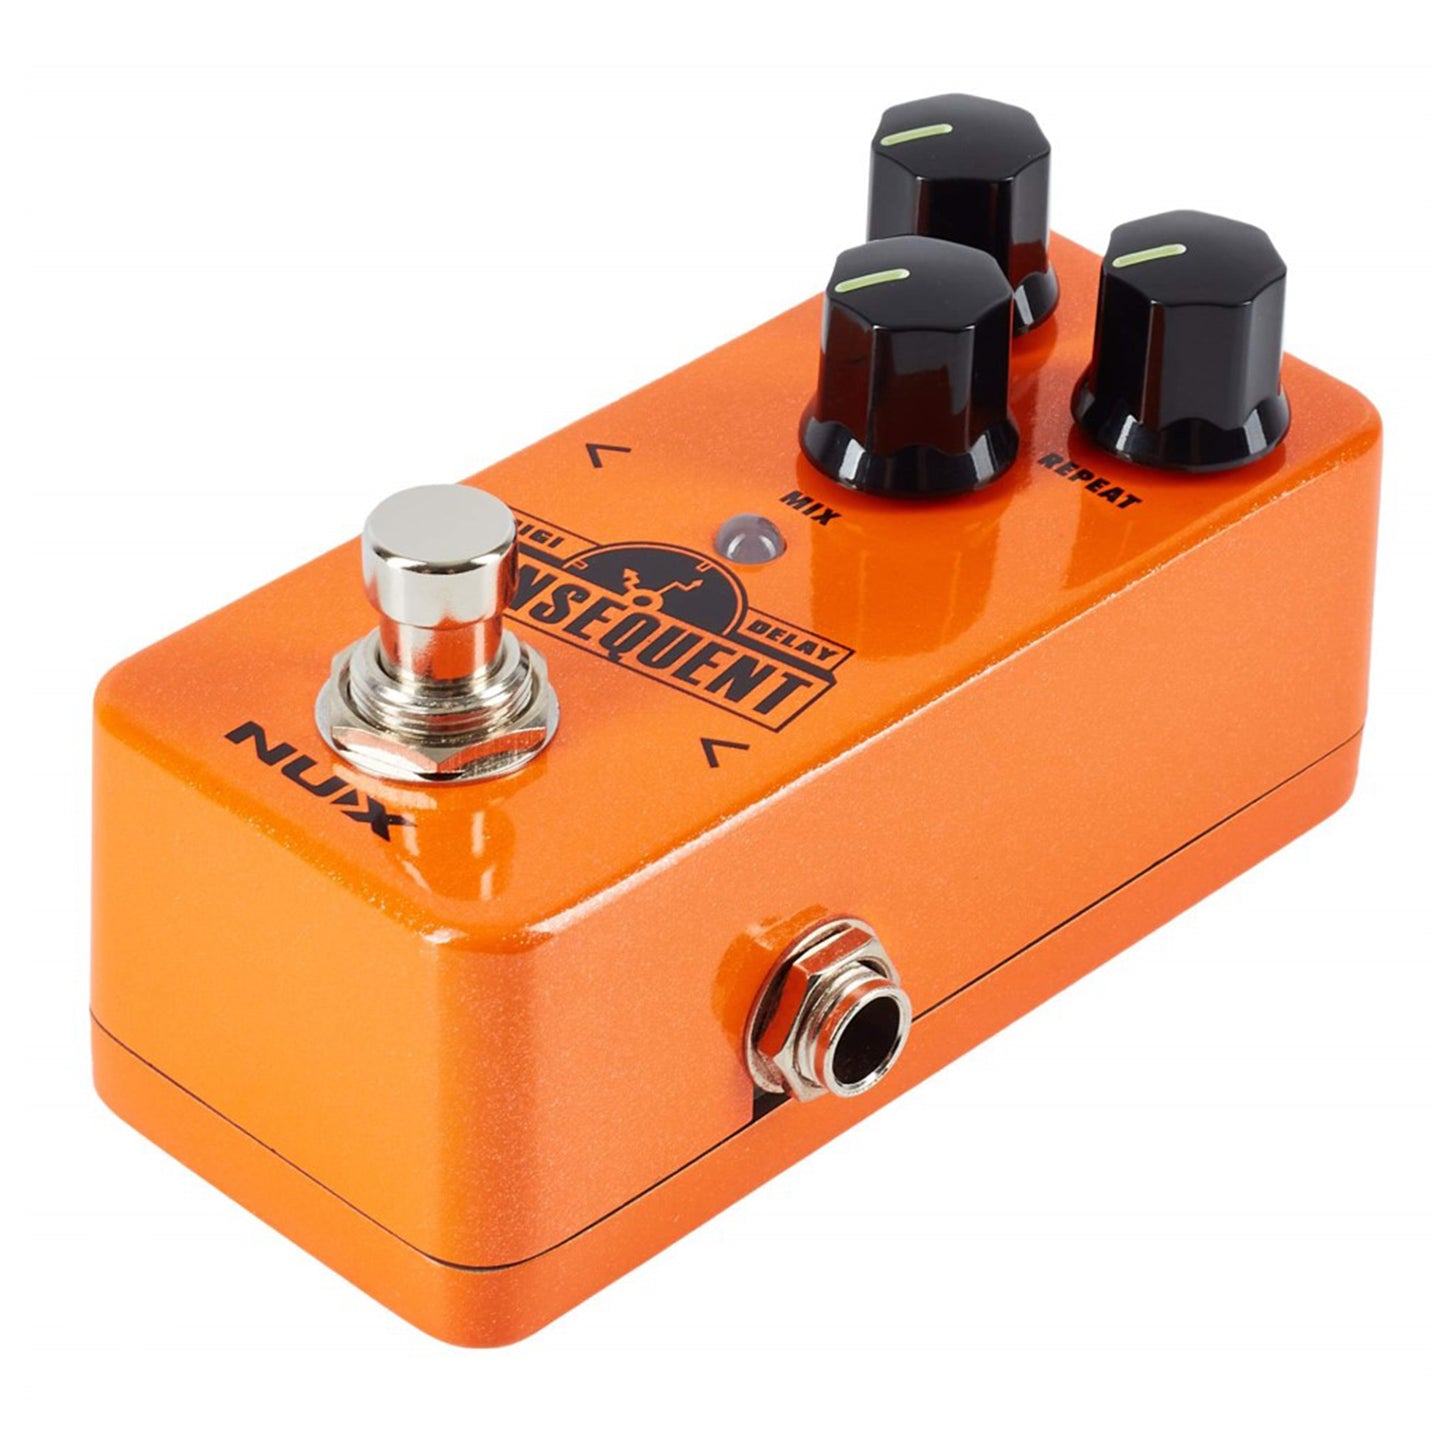 NUX Konsequent Digi Delay Mini Digital Guitar Effects Pedal with Micro USB Port (NDD-2)